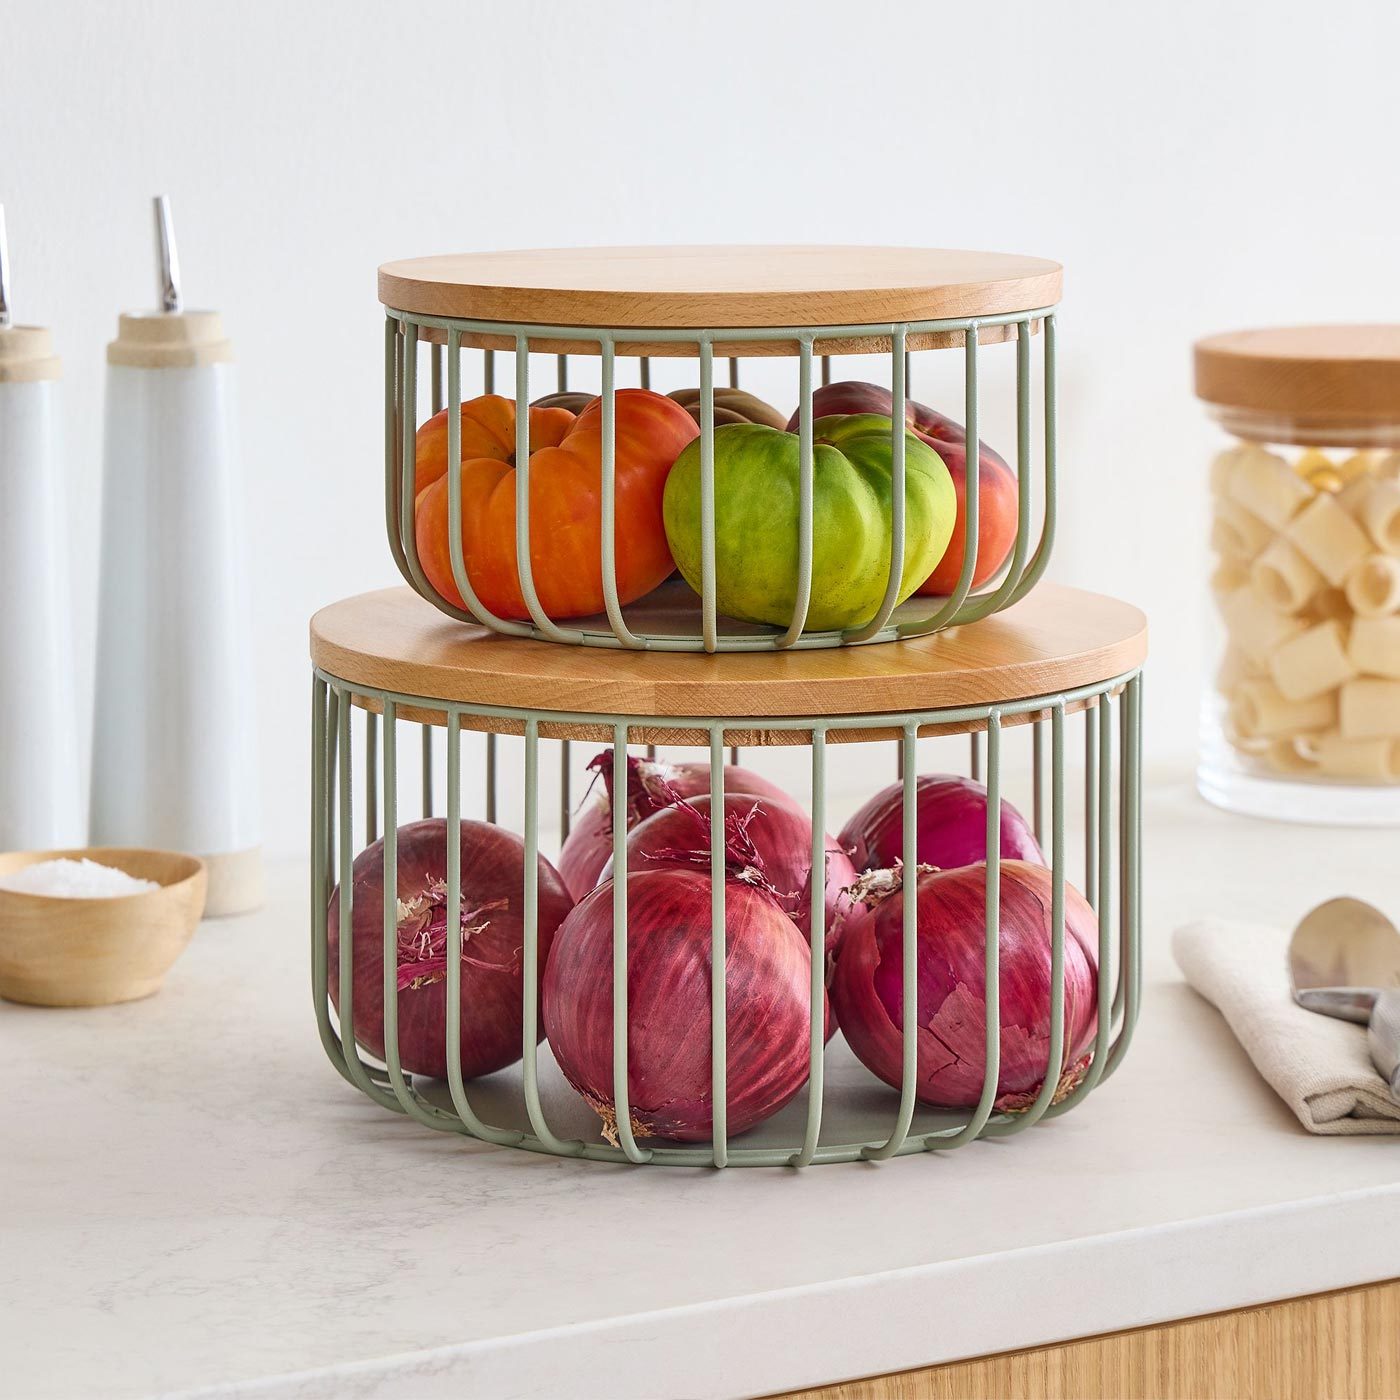 Fruit and vegetable storage : decorative storage solutions